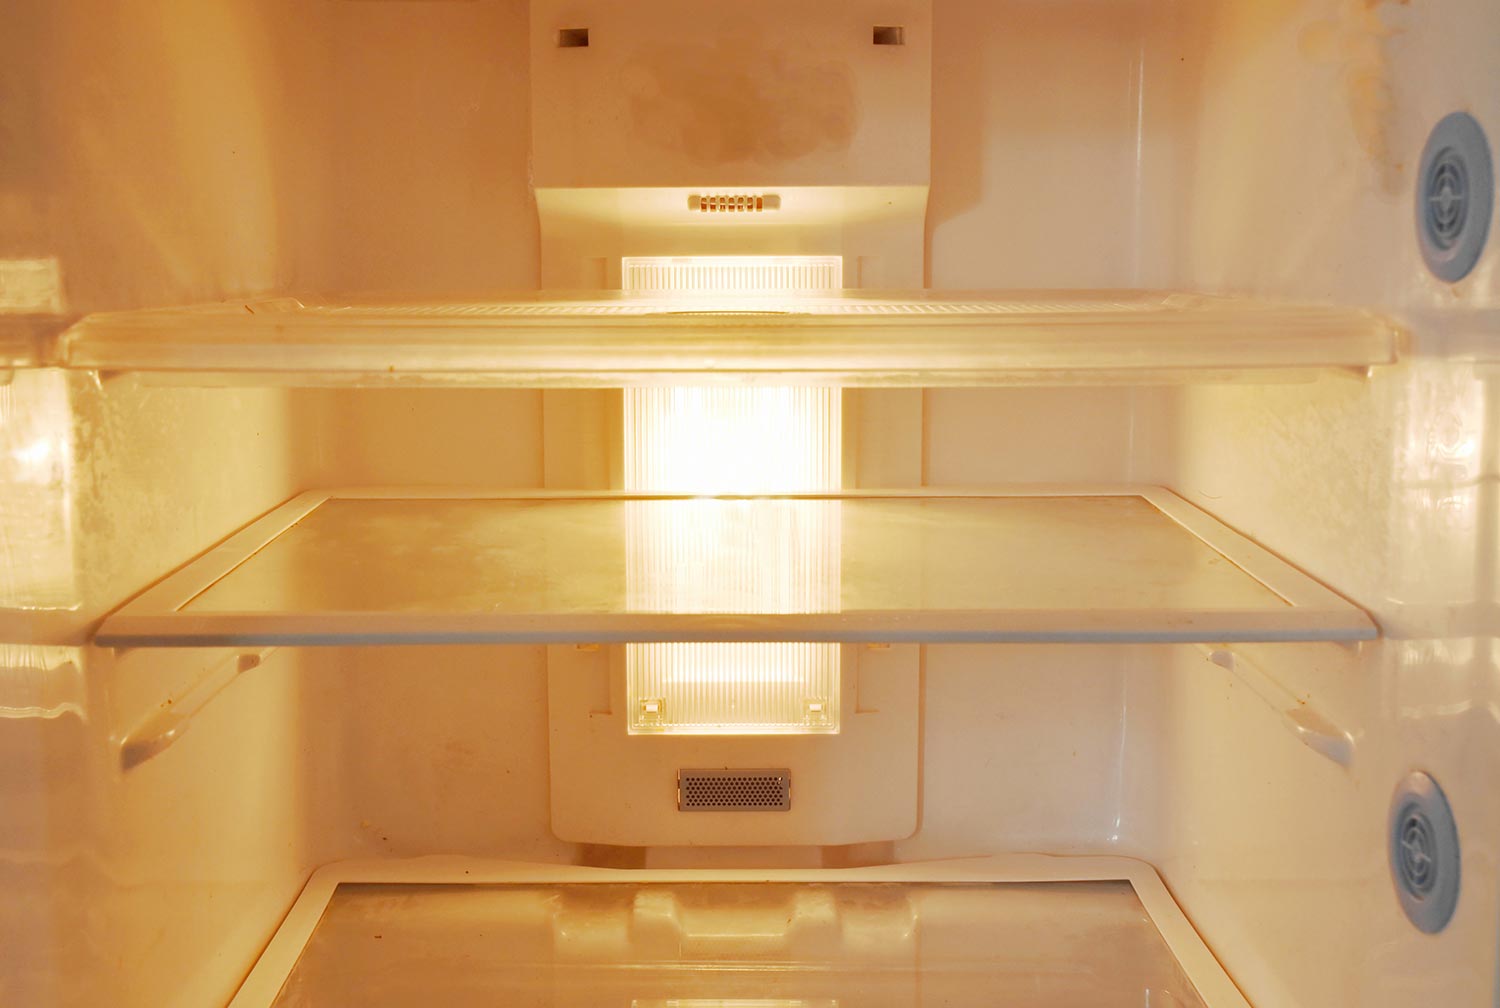 Empty refrigerator after cleaning and prepare to contain food